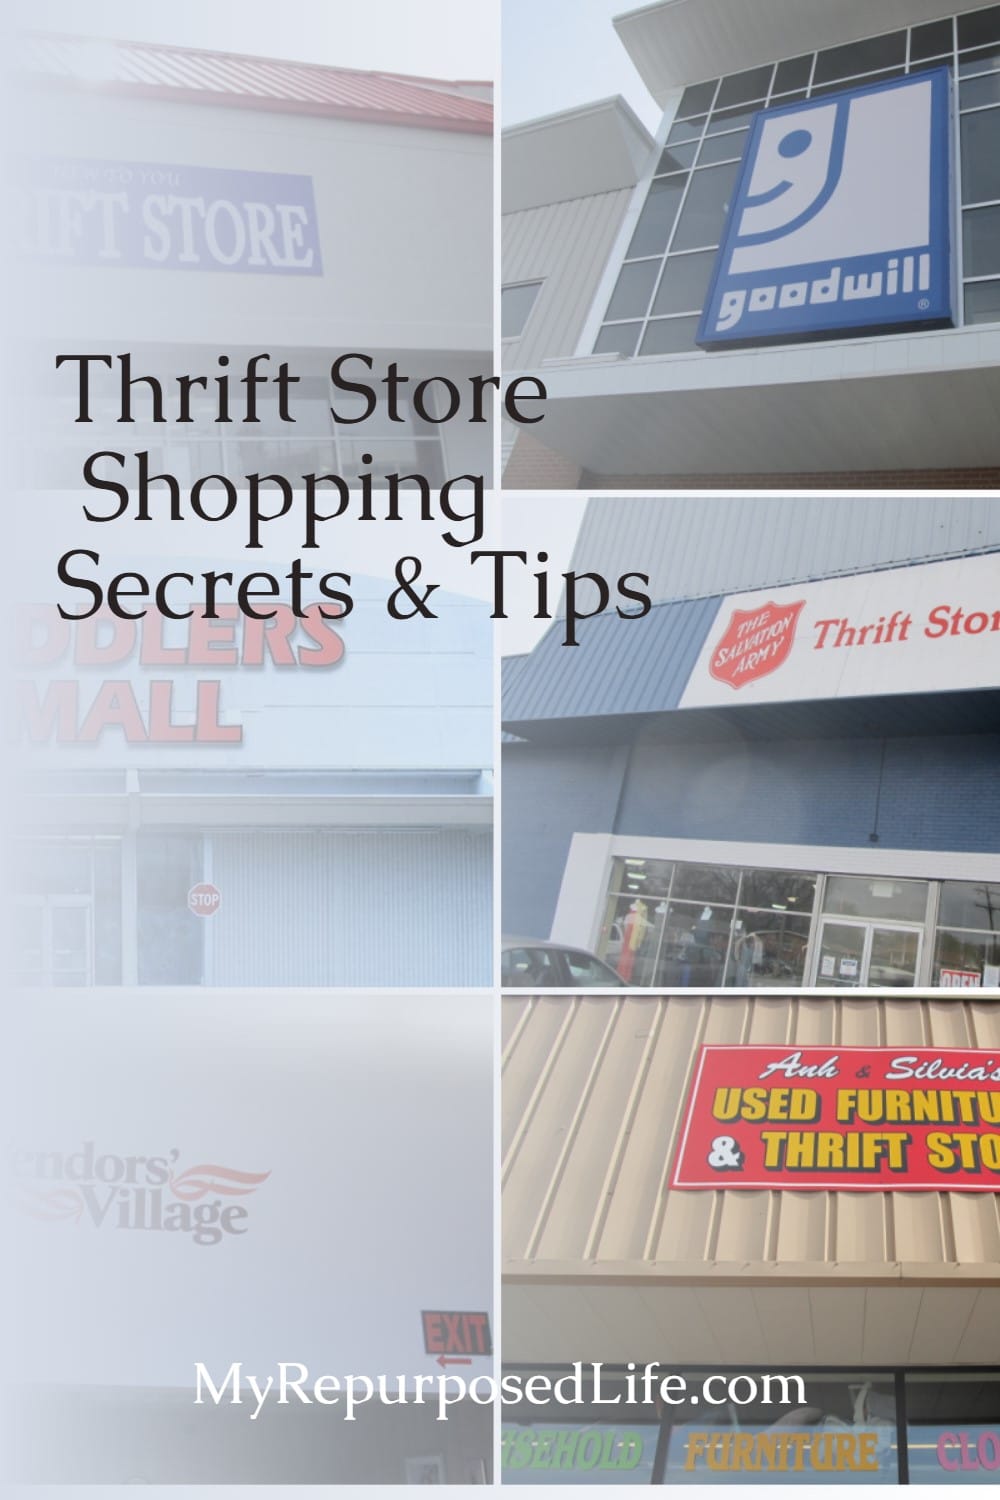 Thrift Store Shopping experts share their best tips and secrets to help you navigate thrift stores for the best deals. WHERE, WHEN, HOW to get the best deals. #MyRepurposedLife #thrifting #thriftshopping via @repurposedlife